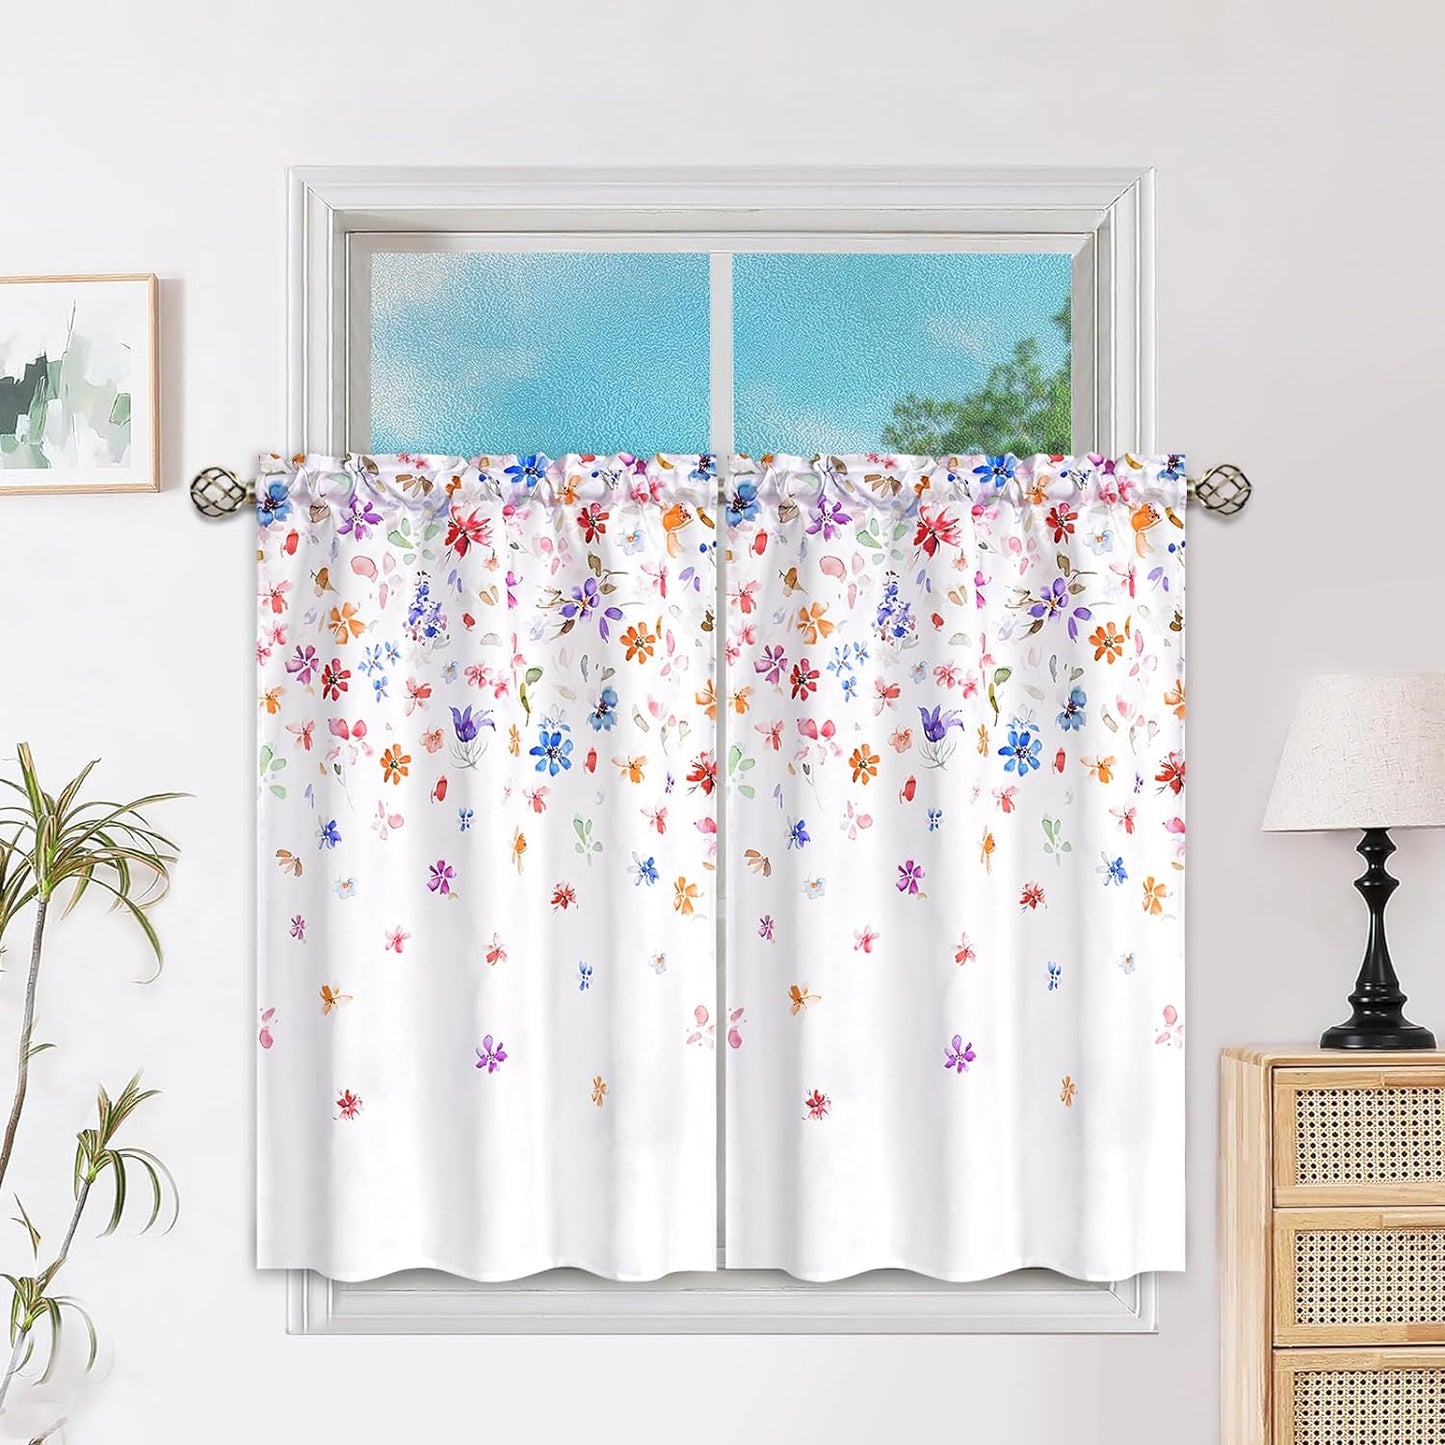 FRAMICS Floral Window Curtains for Living Room Floral Curtains 63 Inch Length 2 Panels Colorful Flowers Curtains for Bedroom Light Filtering Rod Pocket Curtains, 52" W X 63" L  FRAMICS White 26"W X 36"L 